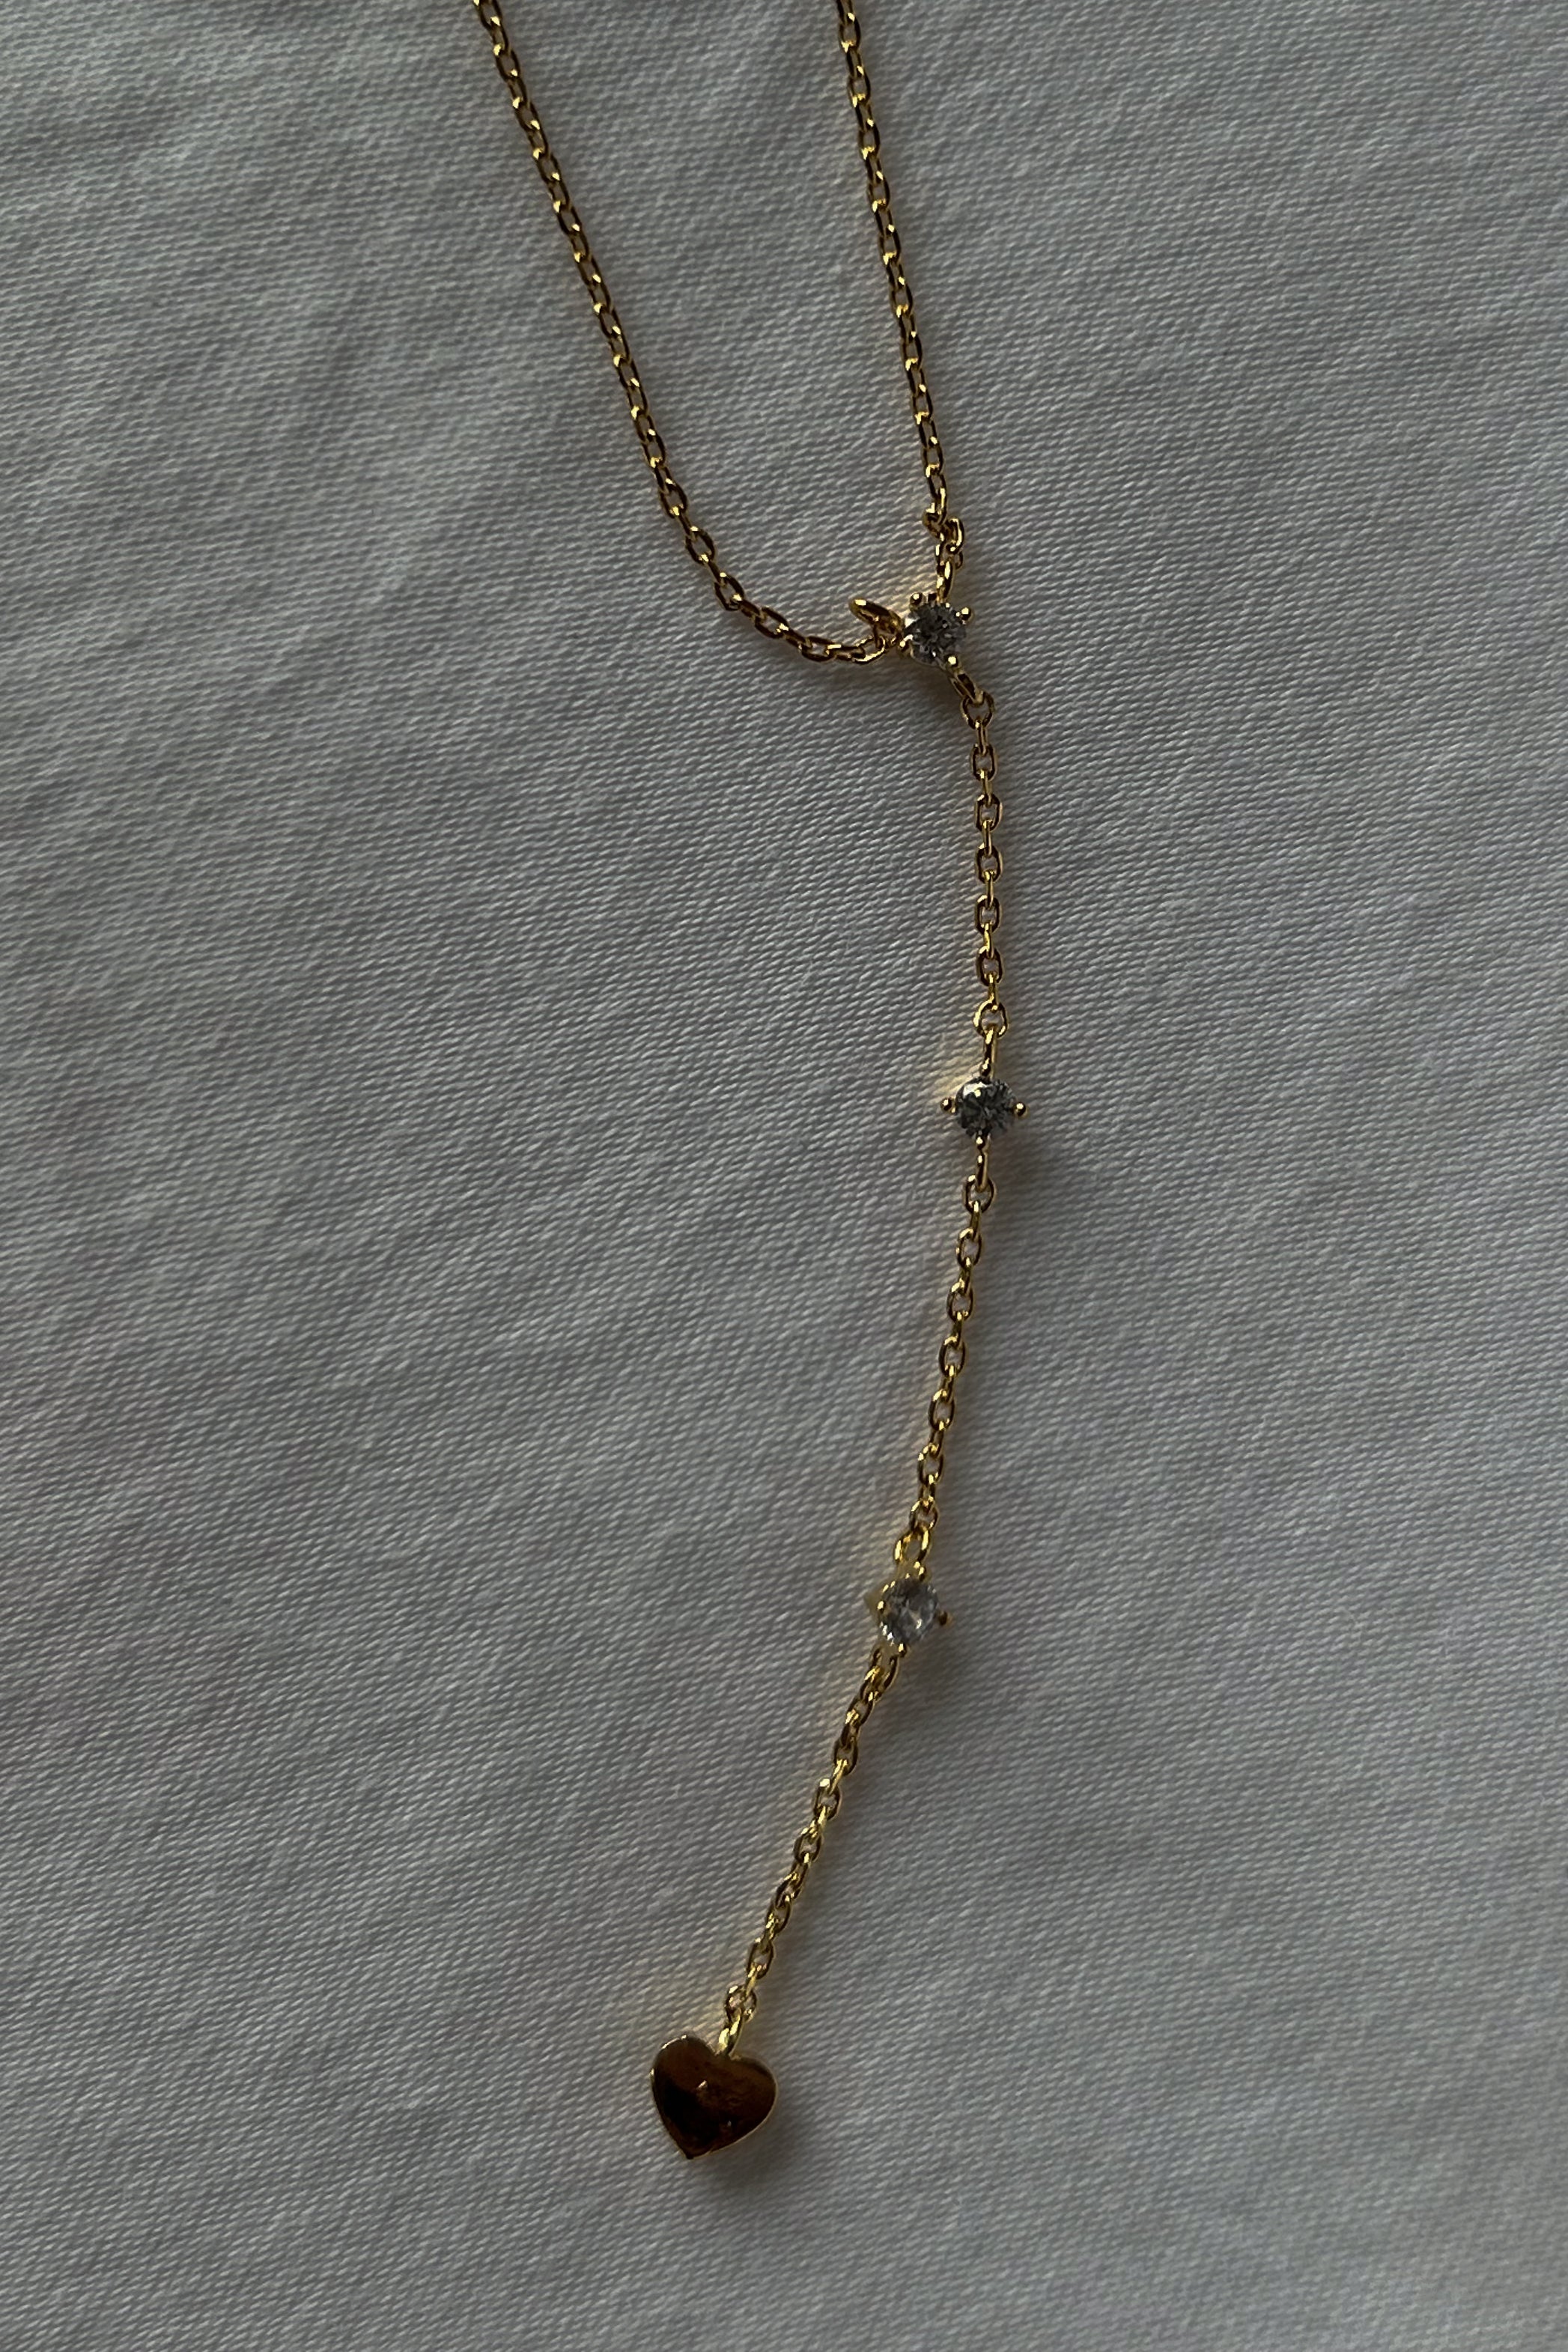 String Me Along Necklace